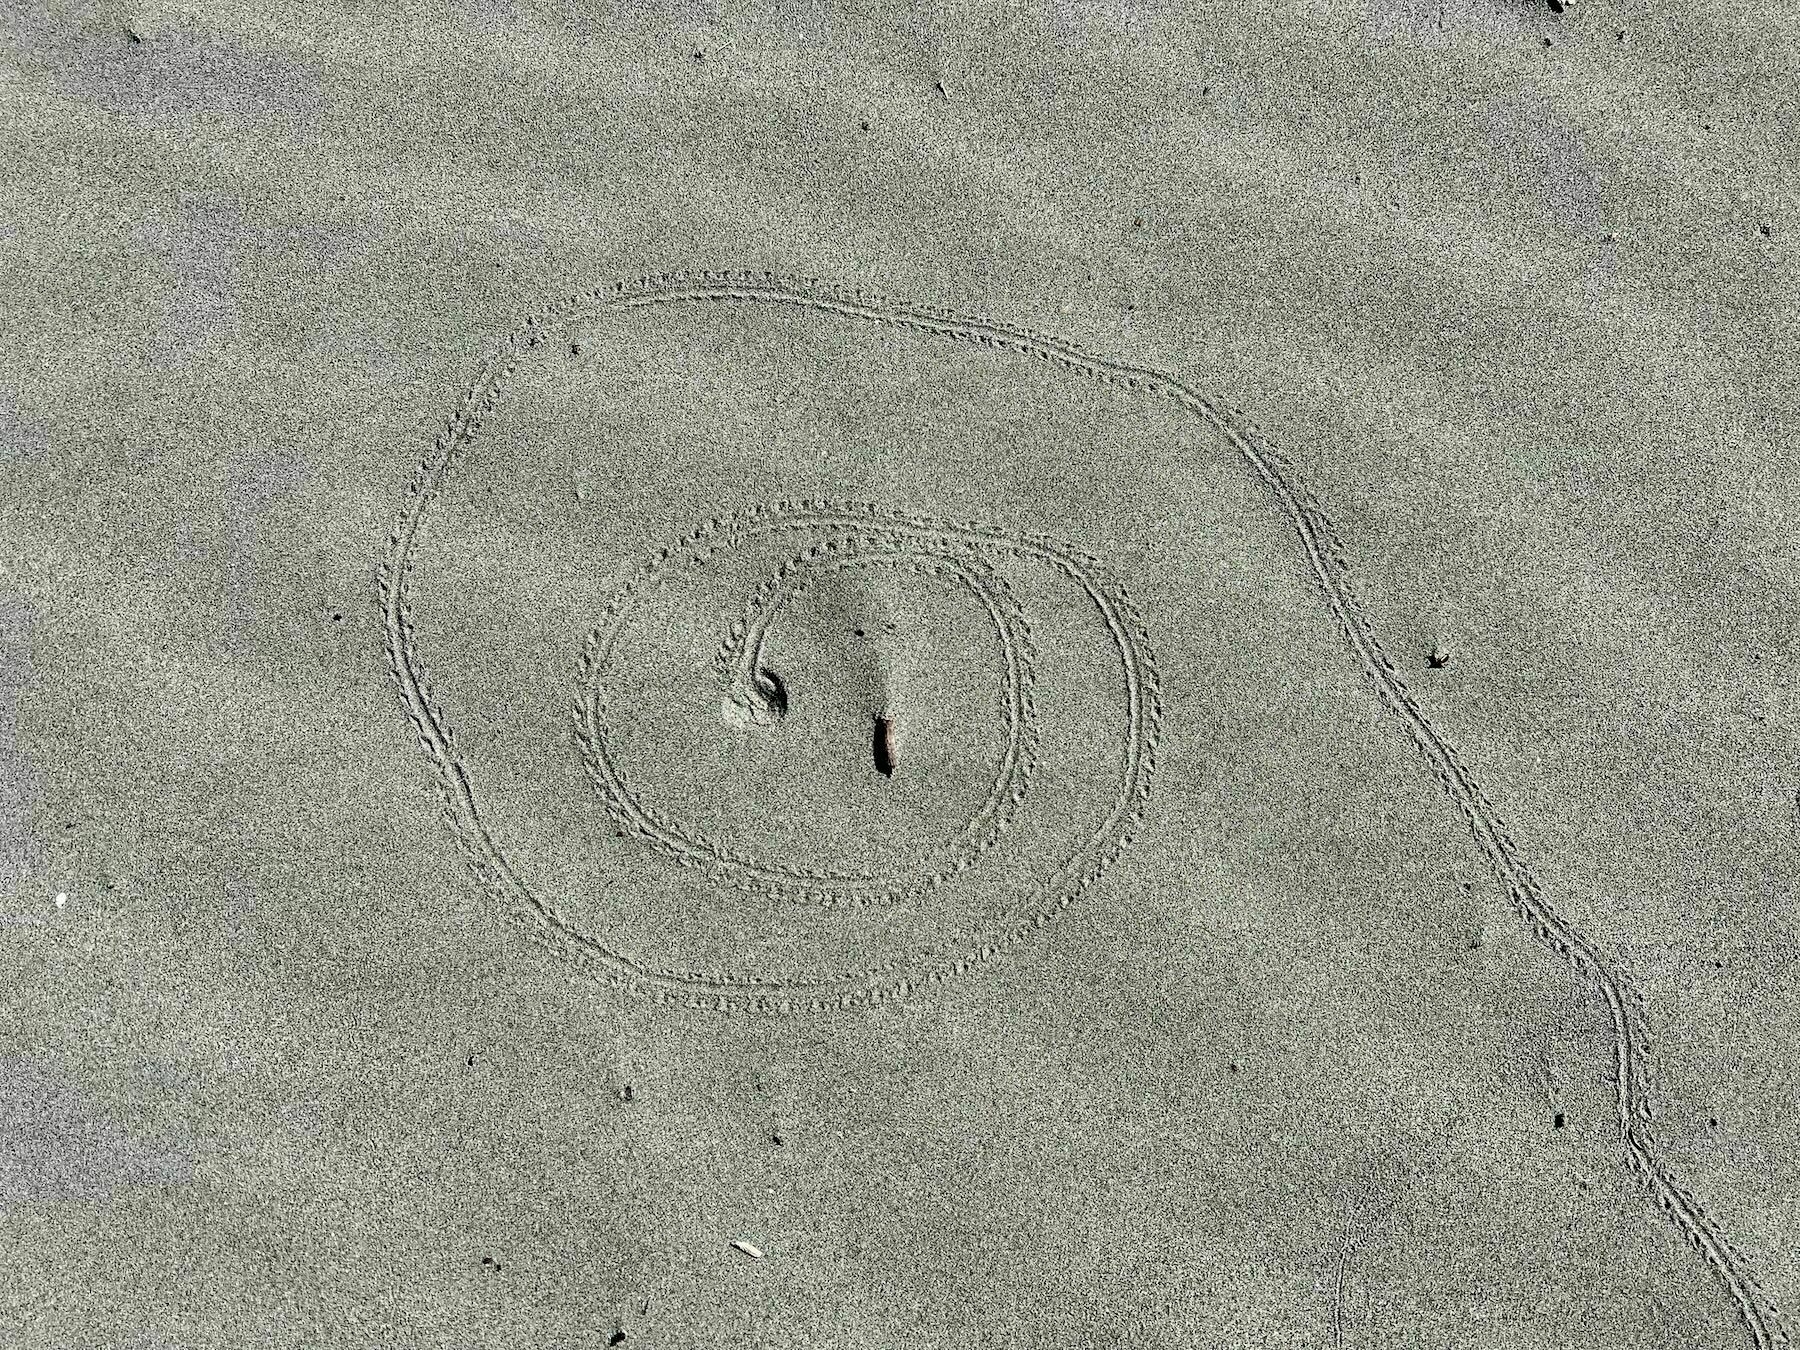 Spiral scarab track in the sand.  